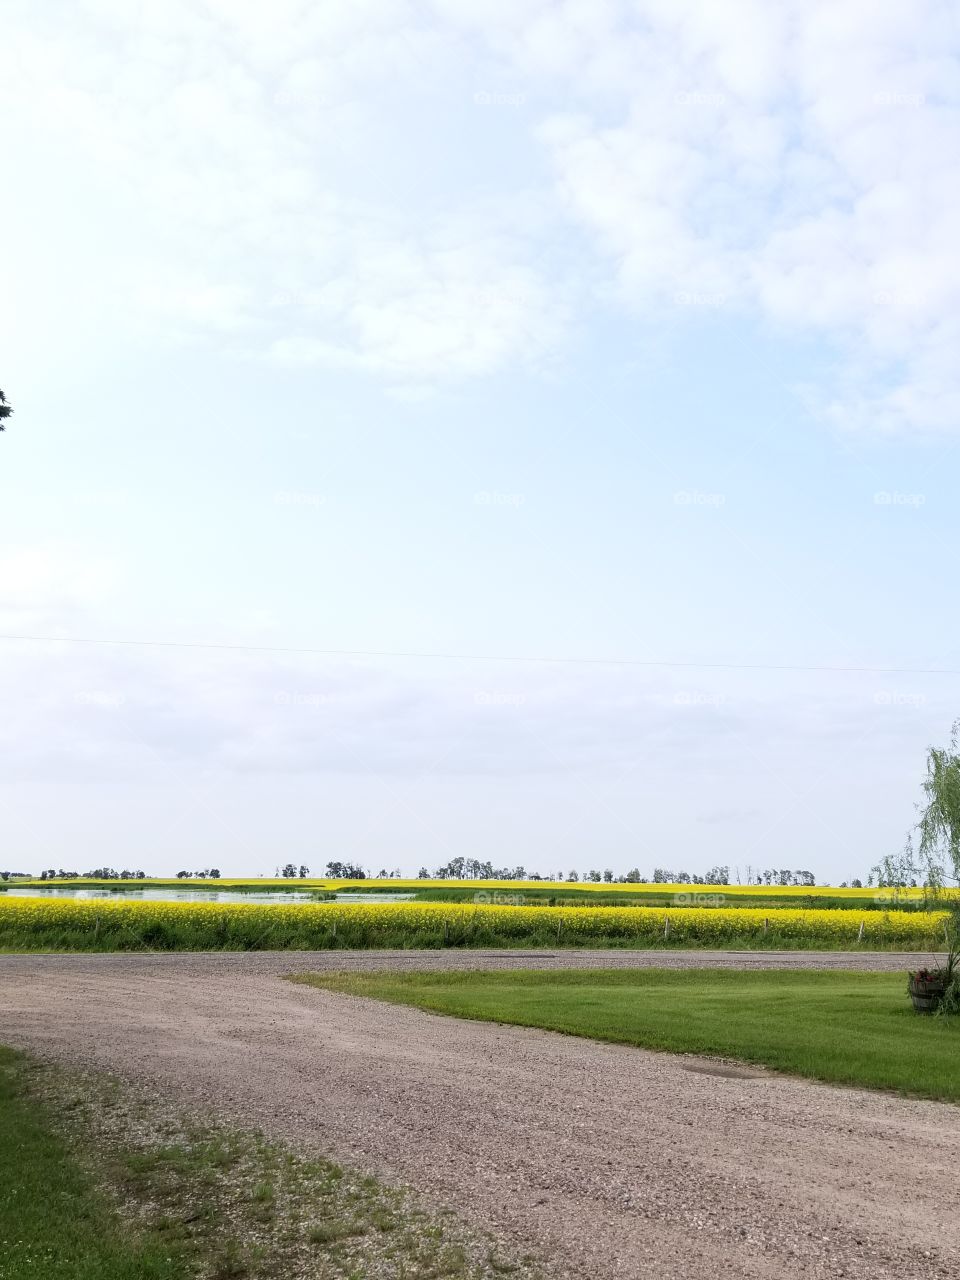 July driveway from farm yard to across the road to the beautiful full blooming yellow canola field.